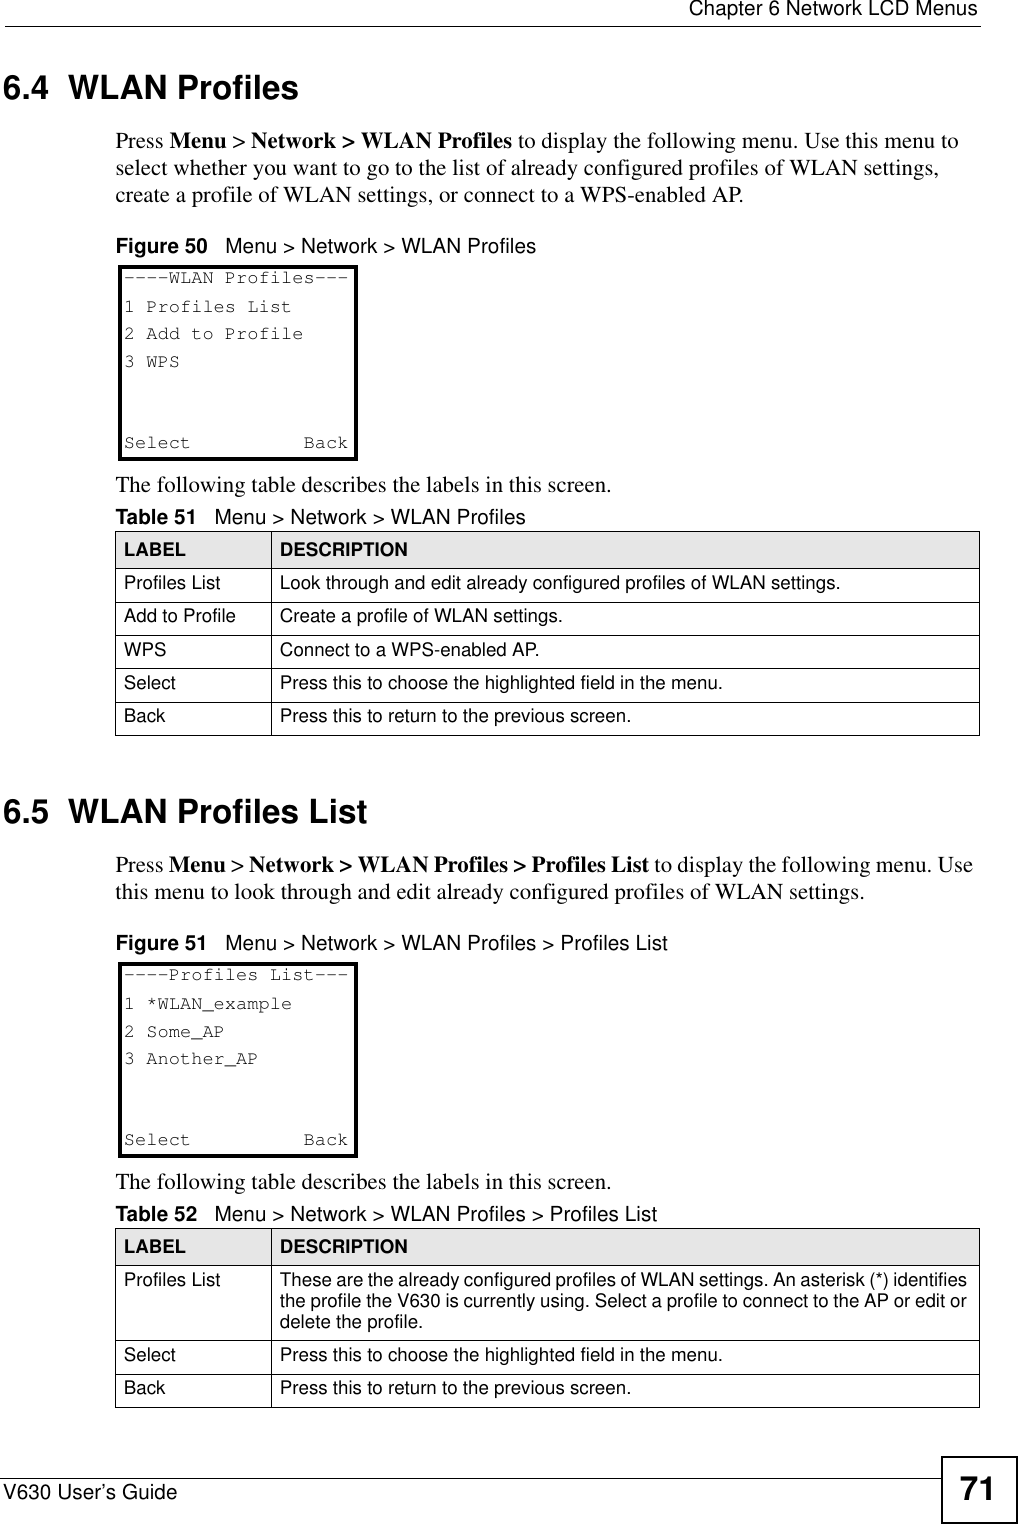  Chapter 6 Network LCD MenusV630 User’s Guide 716.4  WLAN ProfilesPress Menu &gt; Network &gt; WLAN Profiles to display the following menu. Use this menu to select whether you want to go to the list of already configured profiles of WLAN settings, create a profile of WLAN settings, or connect to a WPS-enabled AP.Figure 50   Menu &gt; Network &gt; WLAN ProfilesThe following table describes the labels in this screen.6.5  WLAN Profiles ListPress Menu &gt; Network &gt; WLAN Profiles &gt; Profiles List to display the following menu. Use this menu to look through and edit already configured profiles of WLAN settings.Figure 51   Menu &gt; Network &gt; WLAN Profiles &gt; Profiles ListThe following table describes the labels in this screen.Table 51   Menu &gt; Network &gt; WLAN ProfilesLABEL DESCRIPTIONProfiles List Look through and edit already configured profiles of WLAN settings.Add to Profile Create a profile of WLAN settings.WPS Connect to a WPS-enabled AP.Select Press this to choose the highlighted field in the menu.Back Press this to return to the previous screen.----WLAN Profiles---1 Profiles List2 Add to Profile3 WPSSelect   BackTable 52   Menu &gt; Network &gt; WLAN Profiles &gt; Profiles ListLABEL DESCRIPTIONProfiles List These are the already configured profiles of WLAN settings. An asterisk (*) identifies the profile the V630 is currently using. Select a profile to connect to the AP or edit or delete the profile.Select Press this to choose the highlighted field in the menu.Back Press this to return to the previous screen.----Profiles List---1 *WLAN_example2 Some_AP3 Another_APSelect   Back